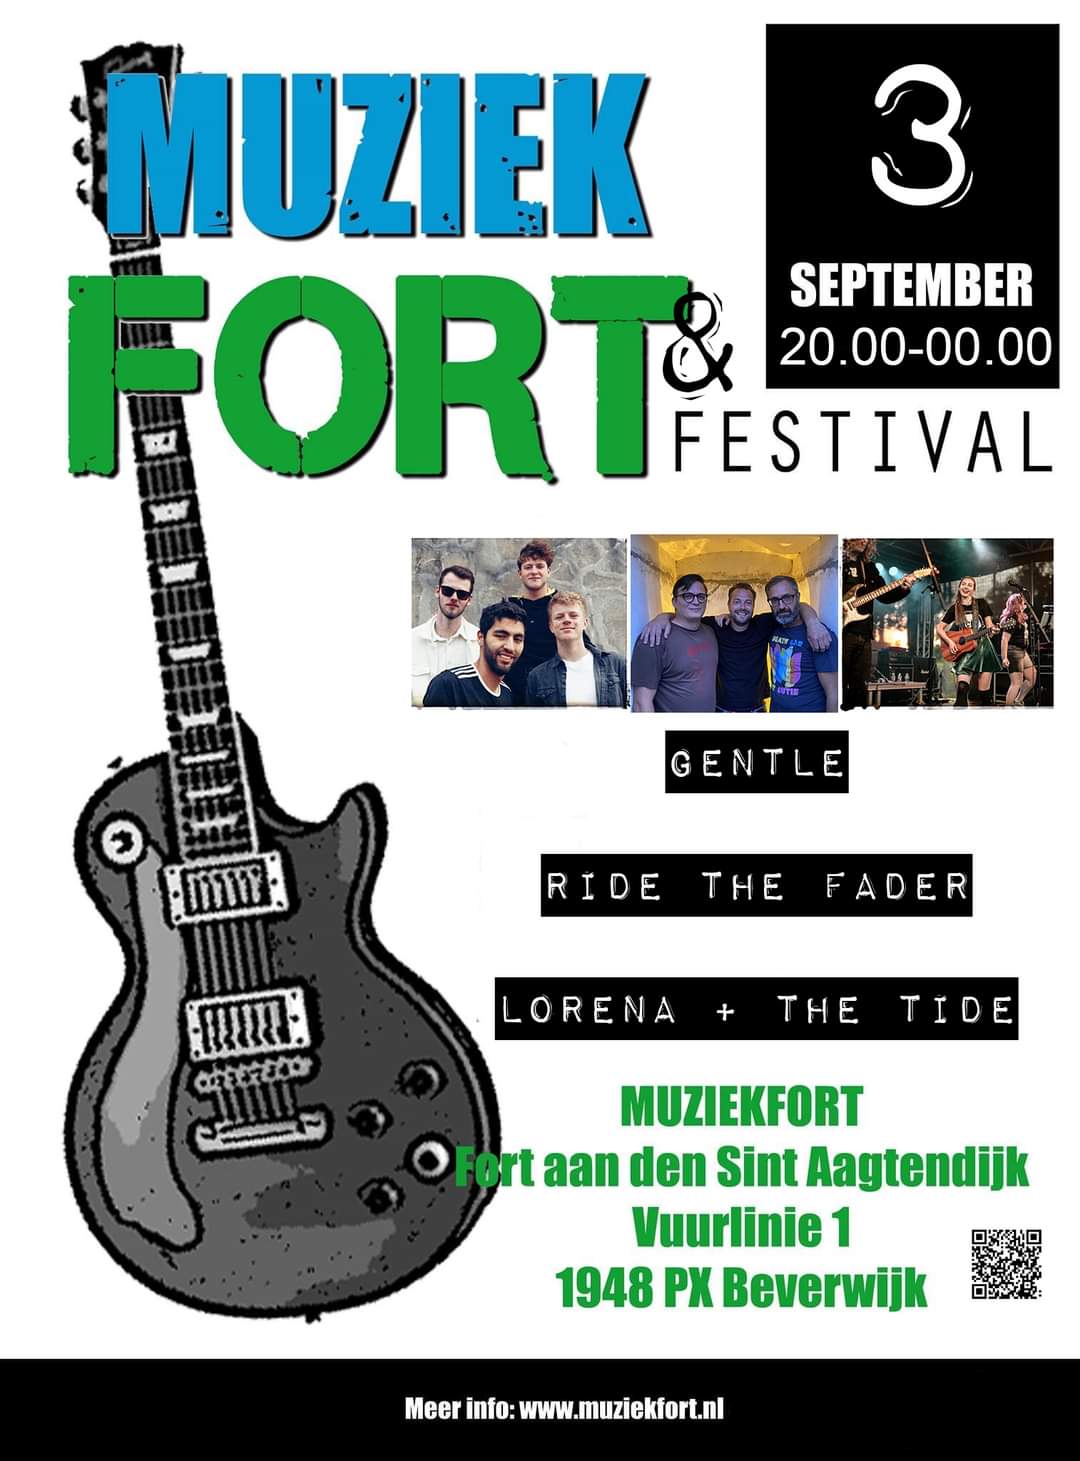 Fortenfestival